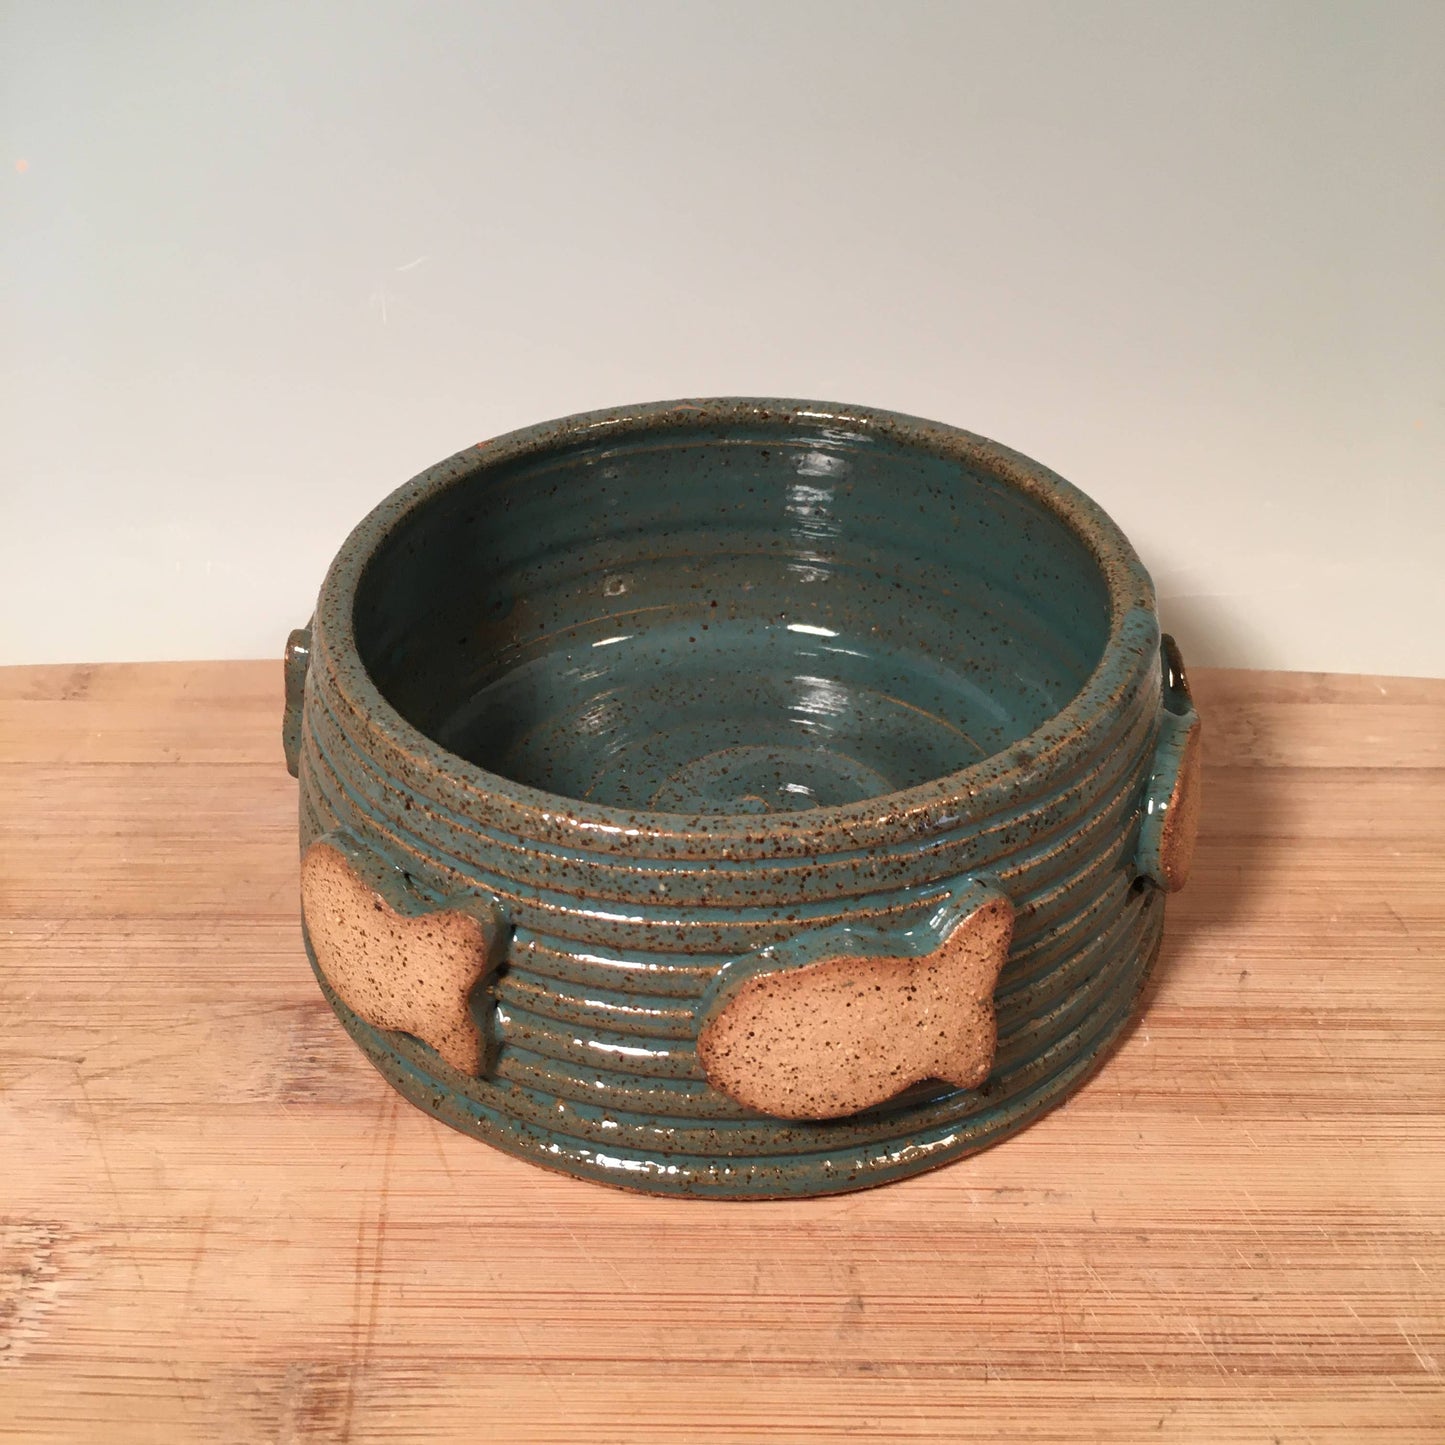 Small Pet Bowl with fish